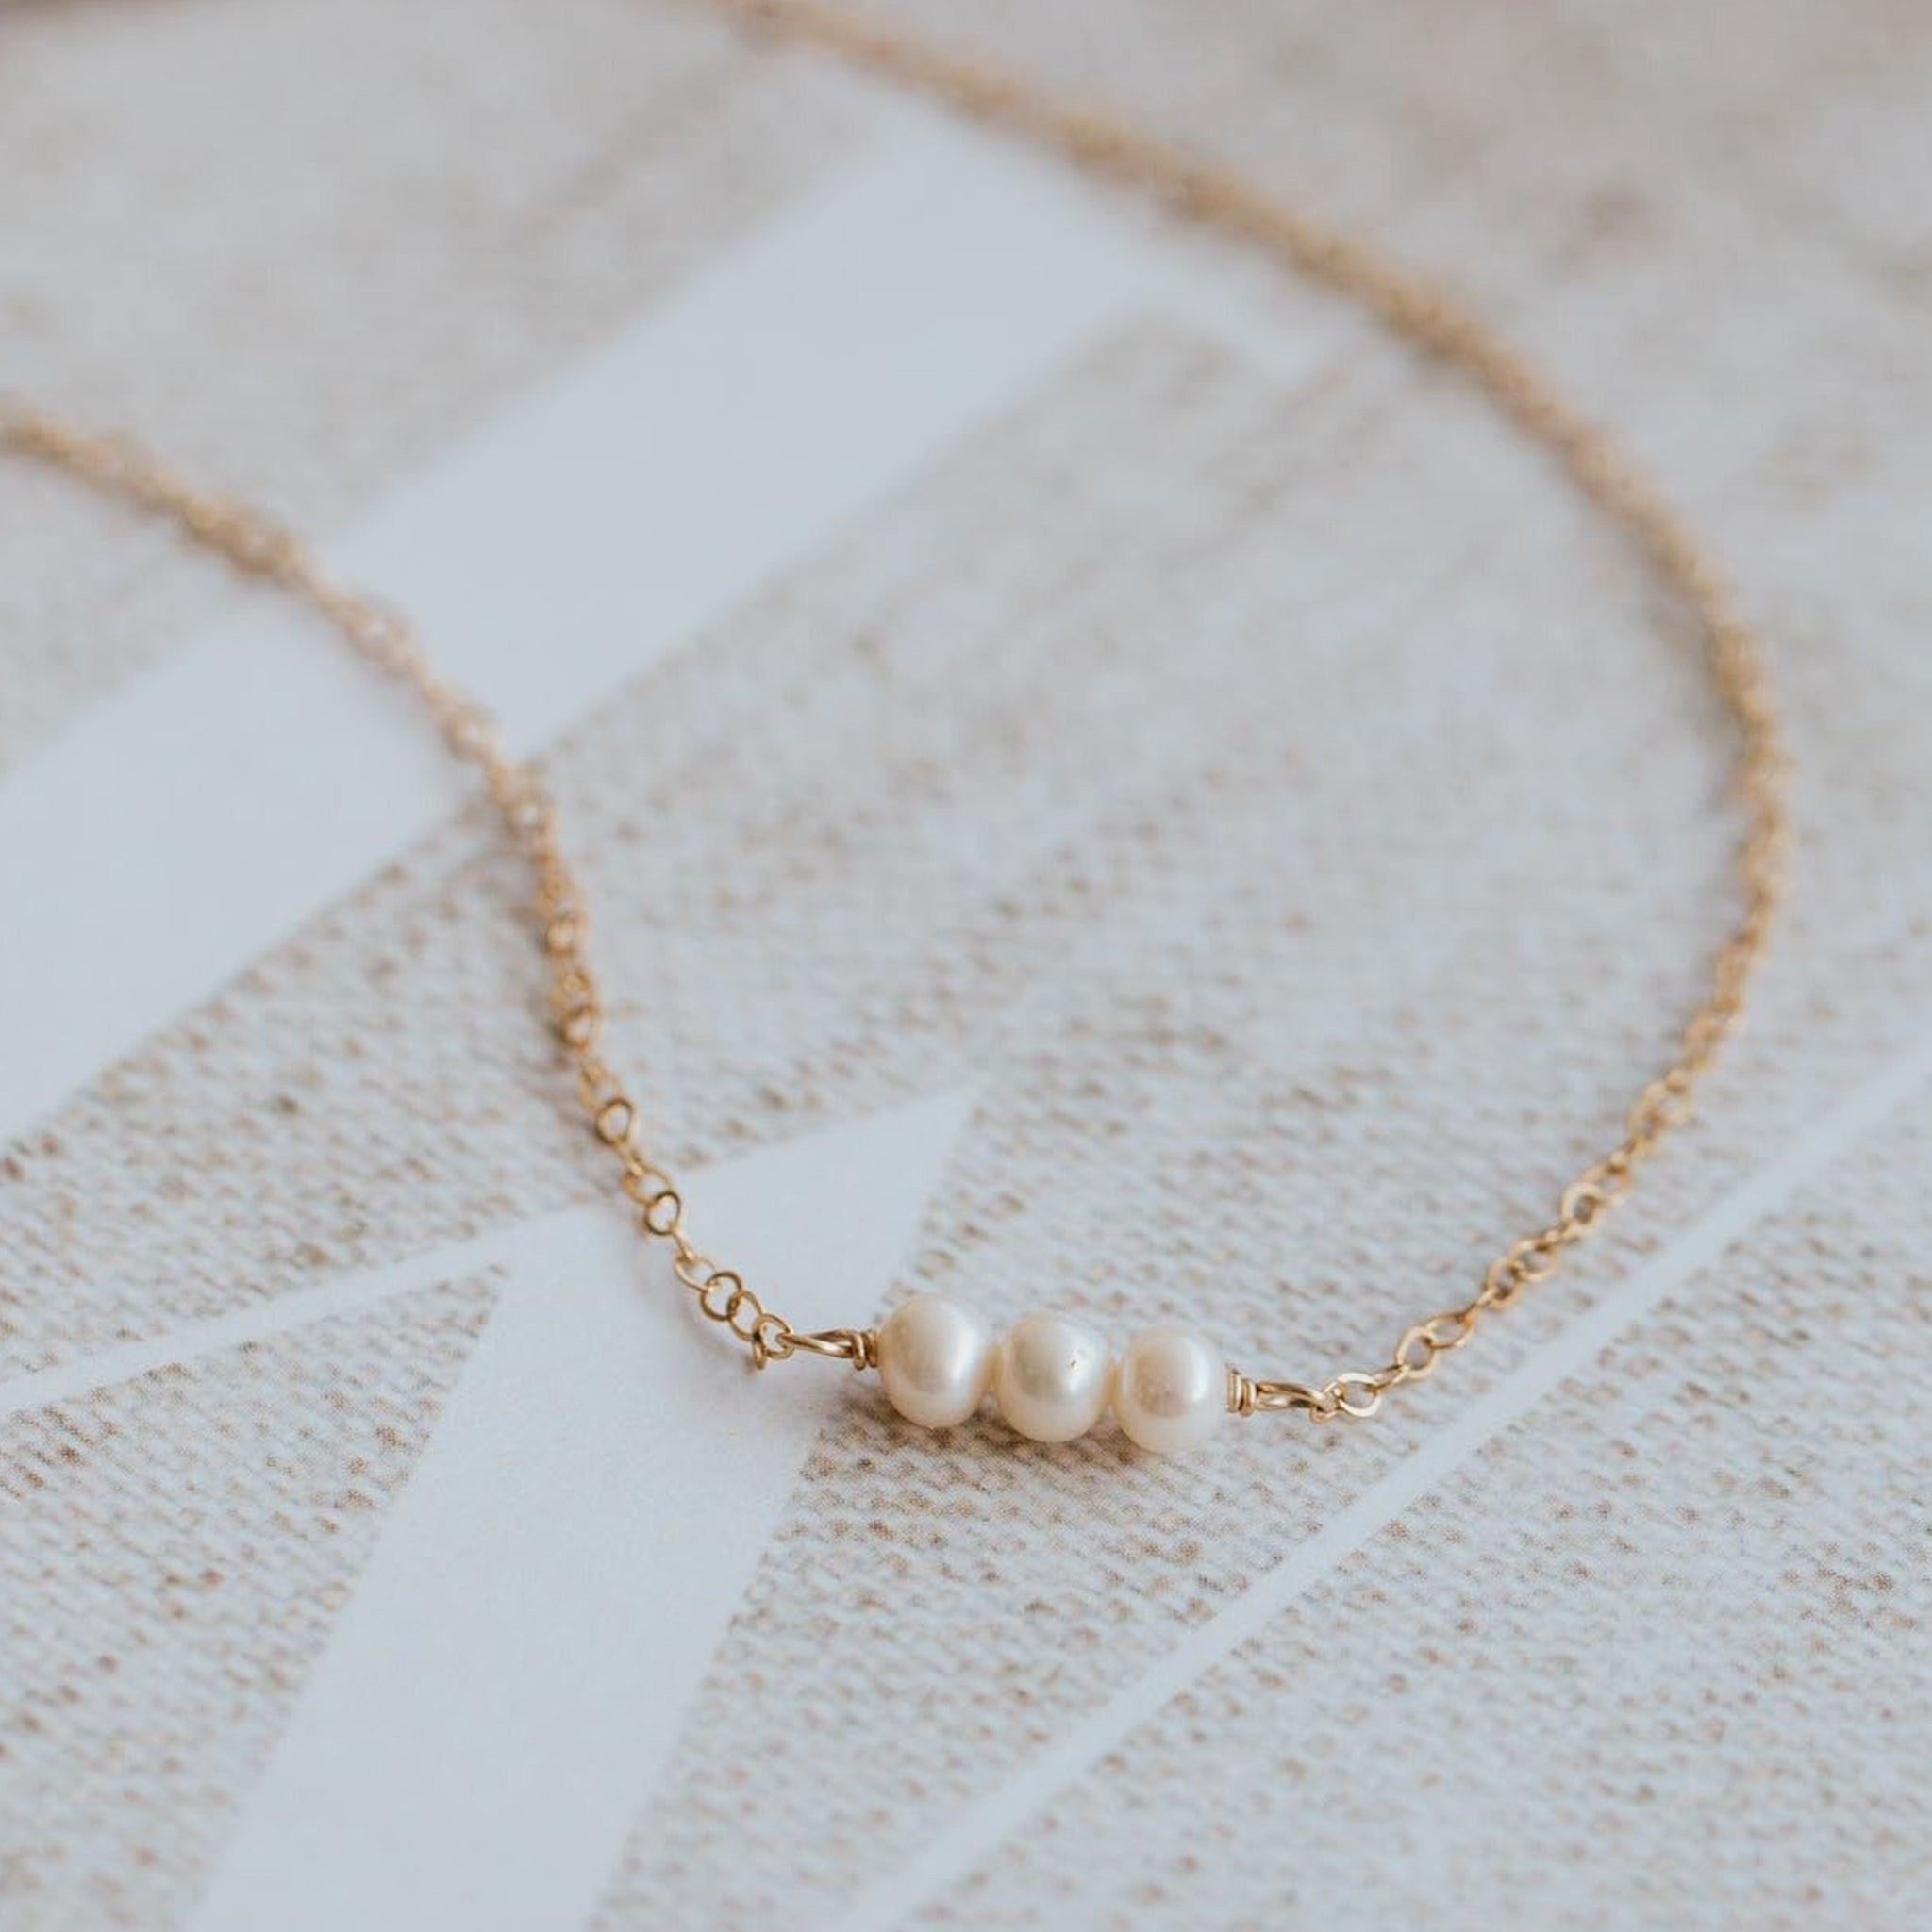 A gold chain necklace with three small pearl connected in the center.